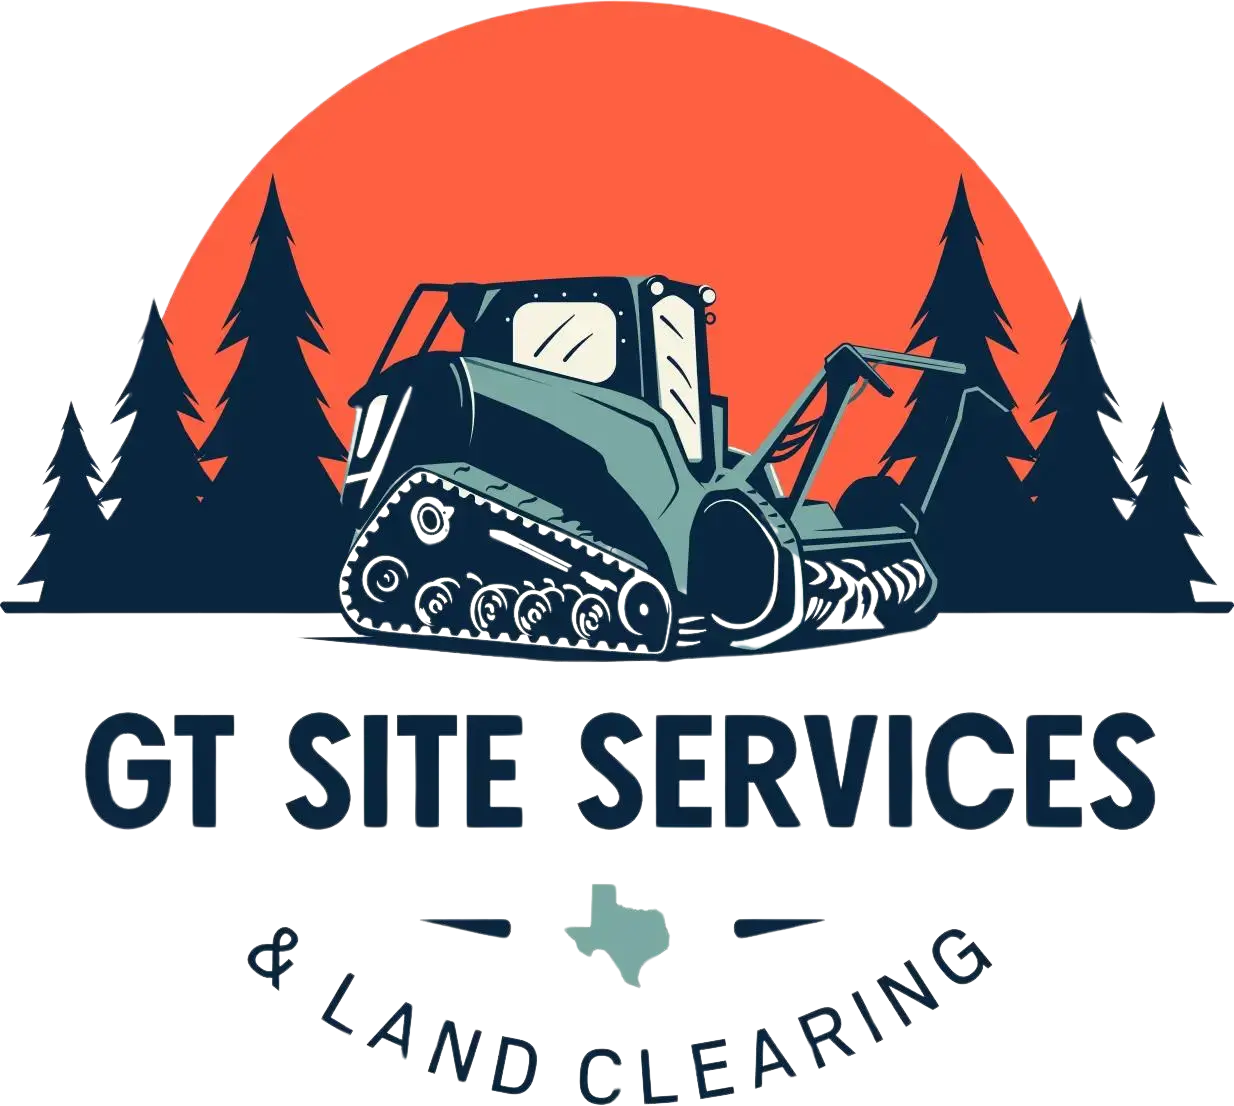 Land Clearing Services in Austin, TX